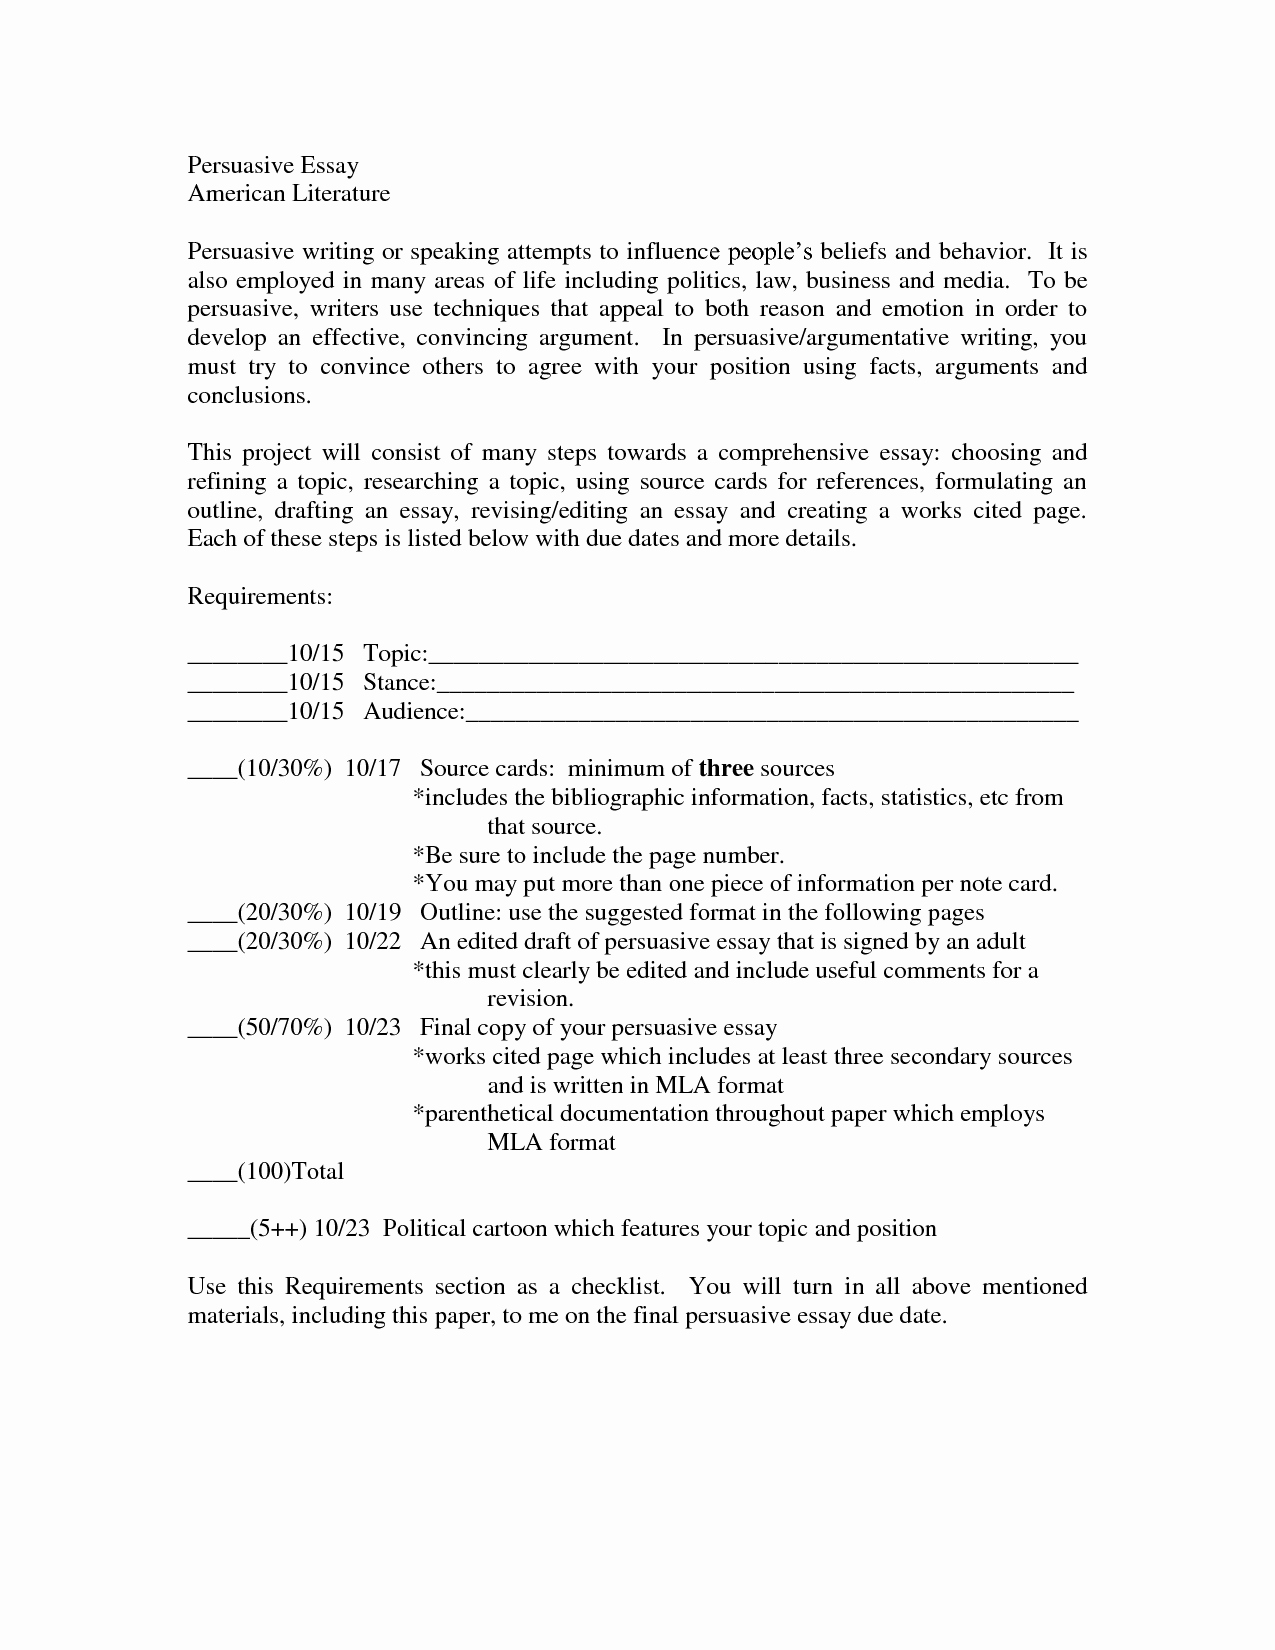 Argumentative Essay Outline Template New Essay Contest for High School Students attracts